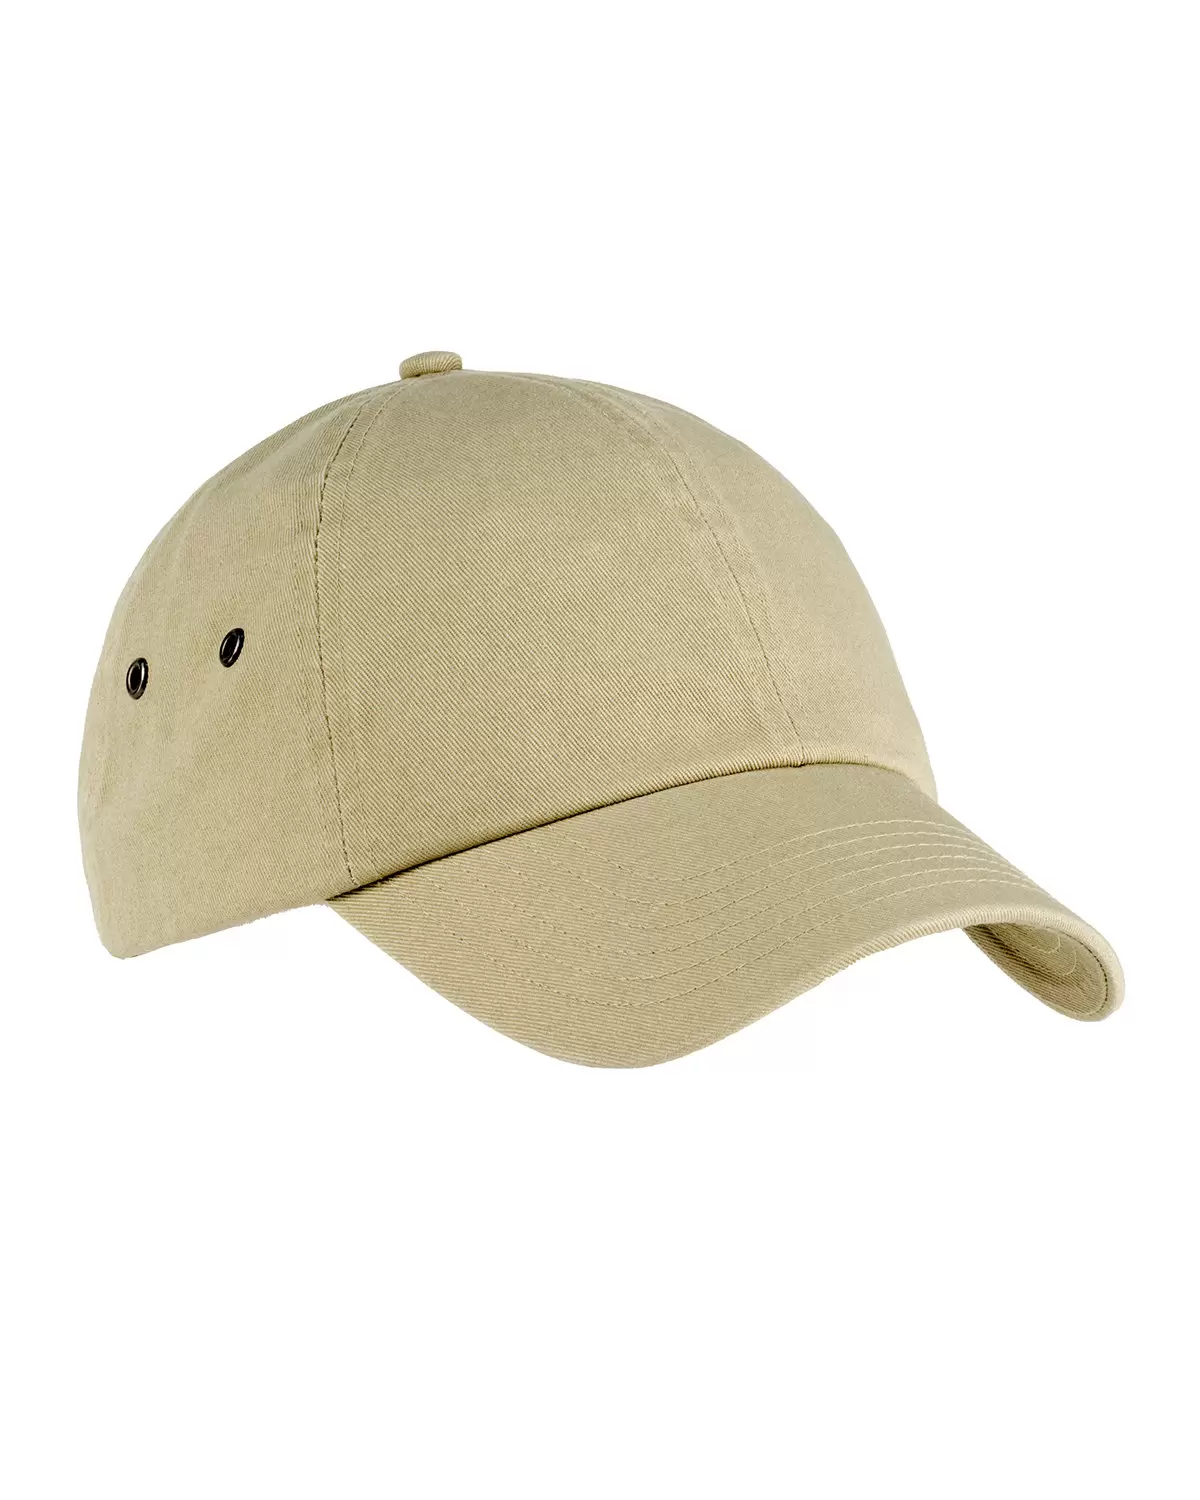 BA529 Big - Accessories Washed Cap Baseball From